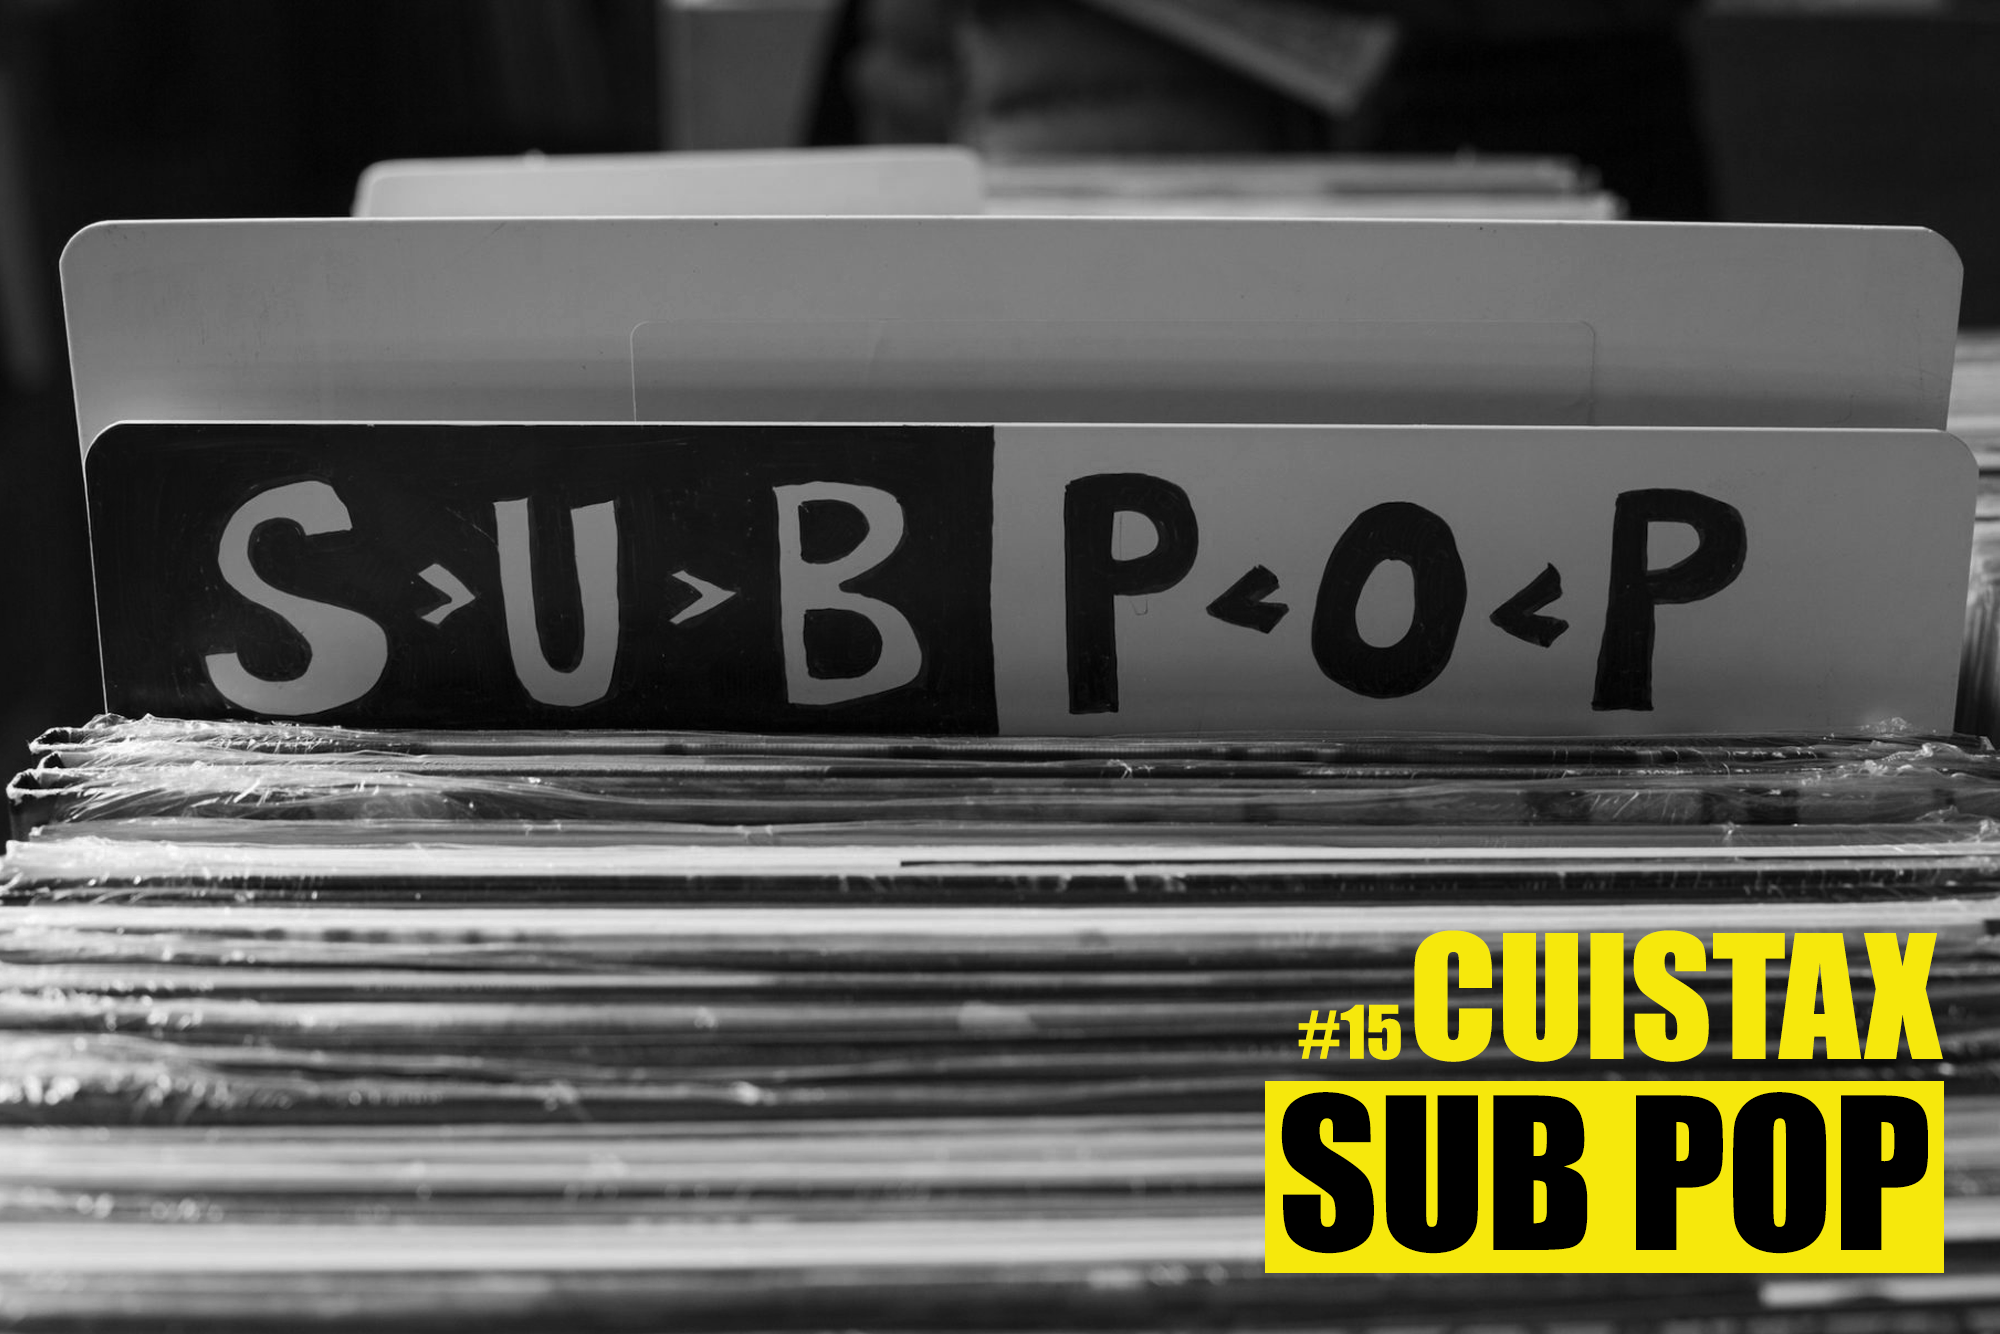 Podcast Cuistax #15 Sub Pop